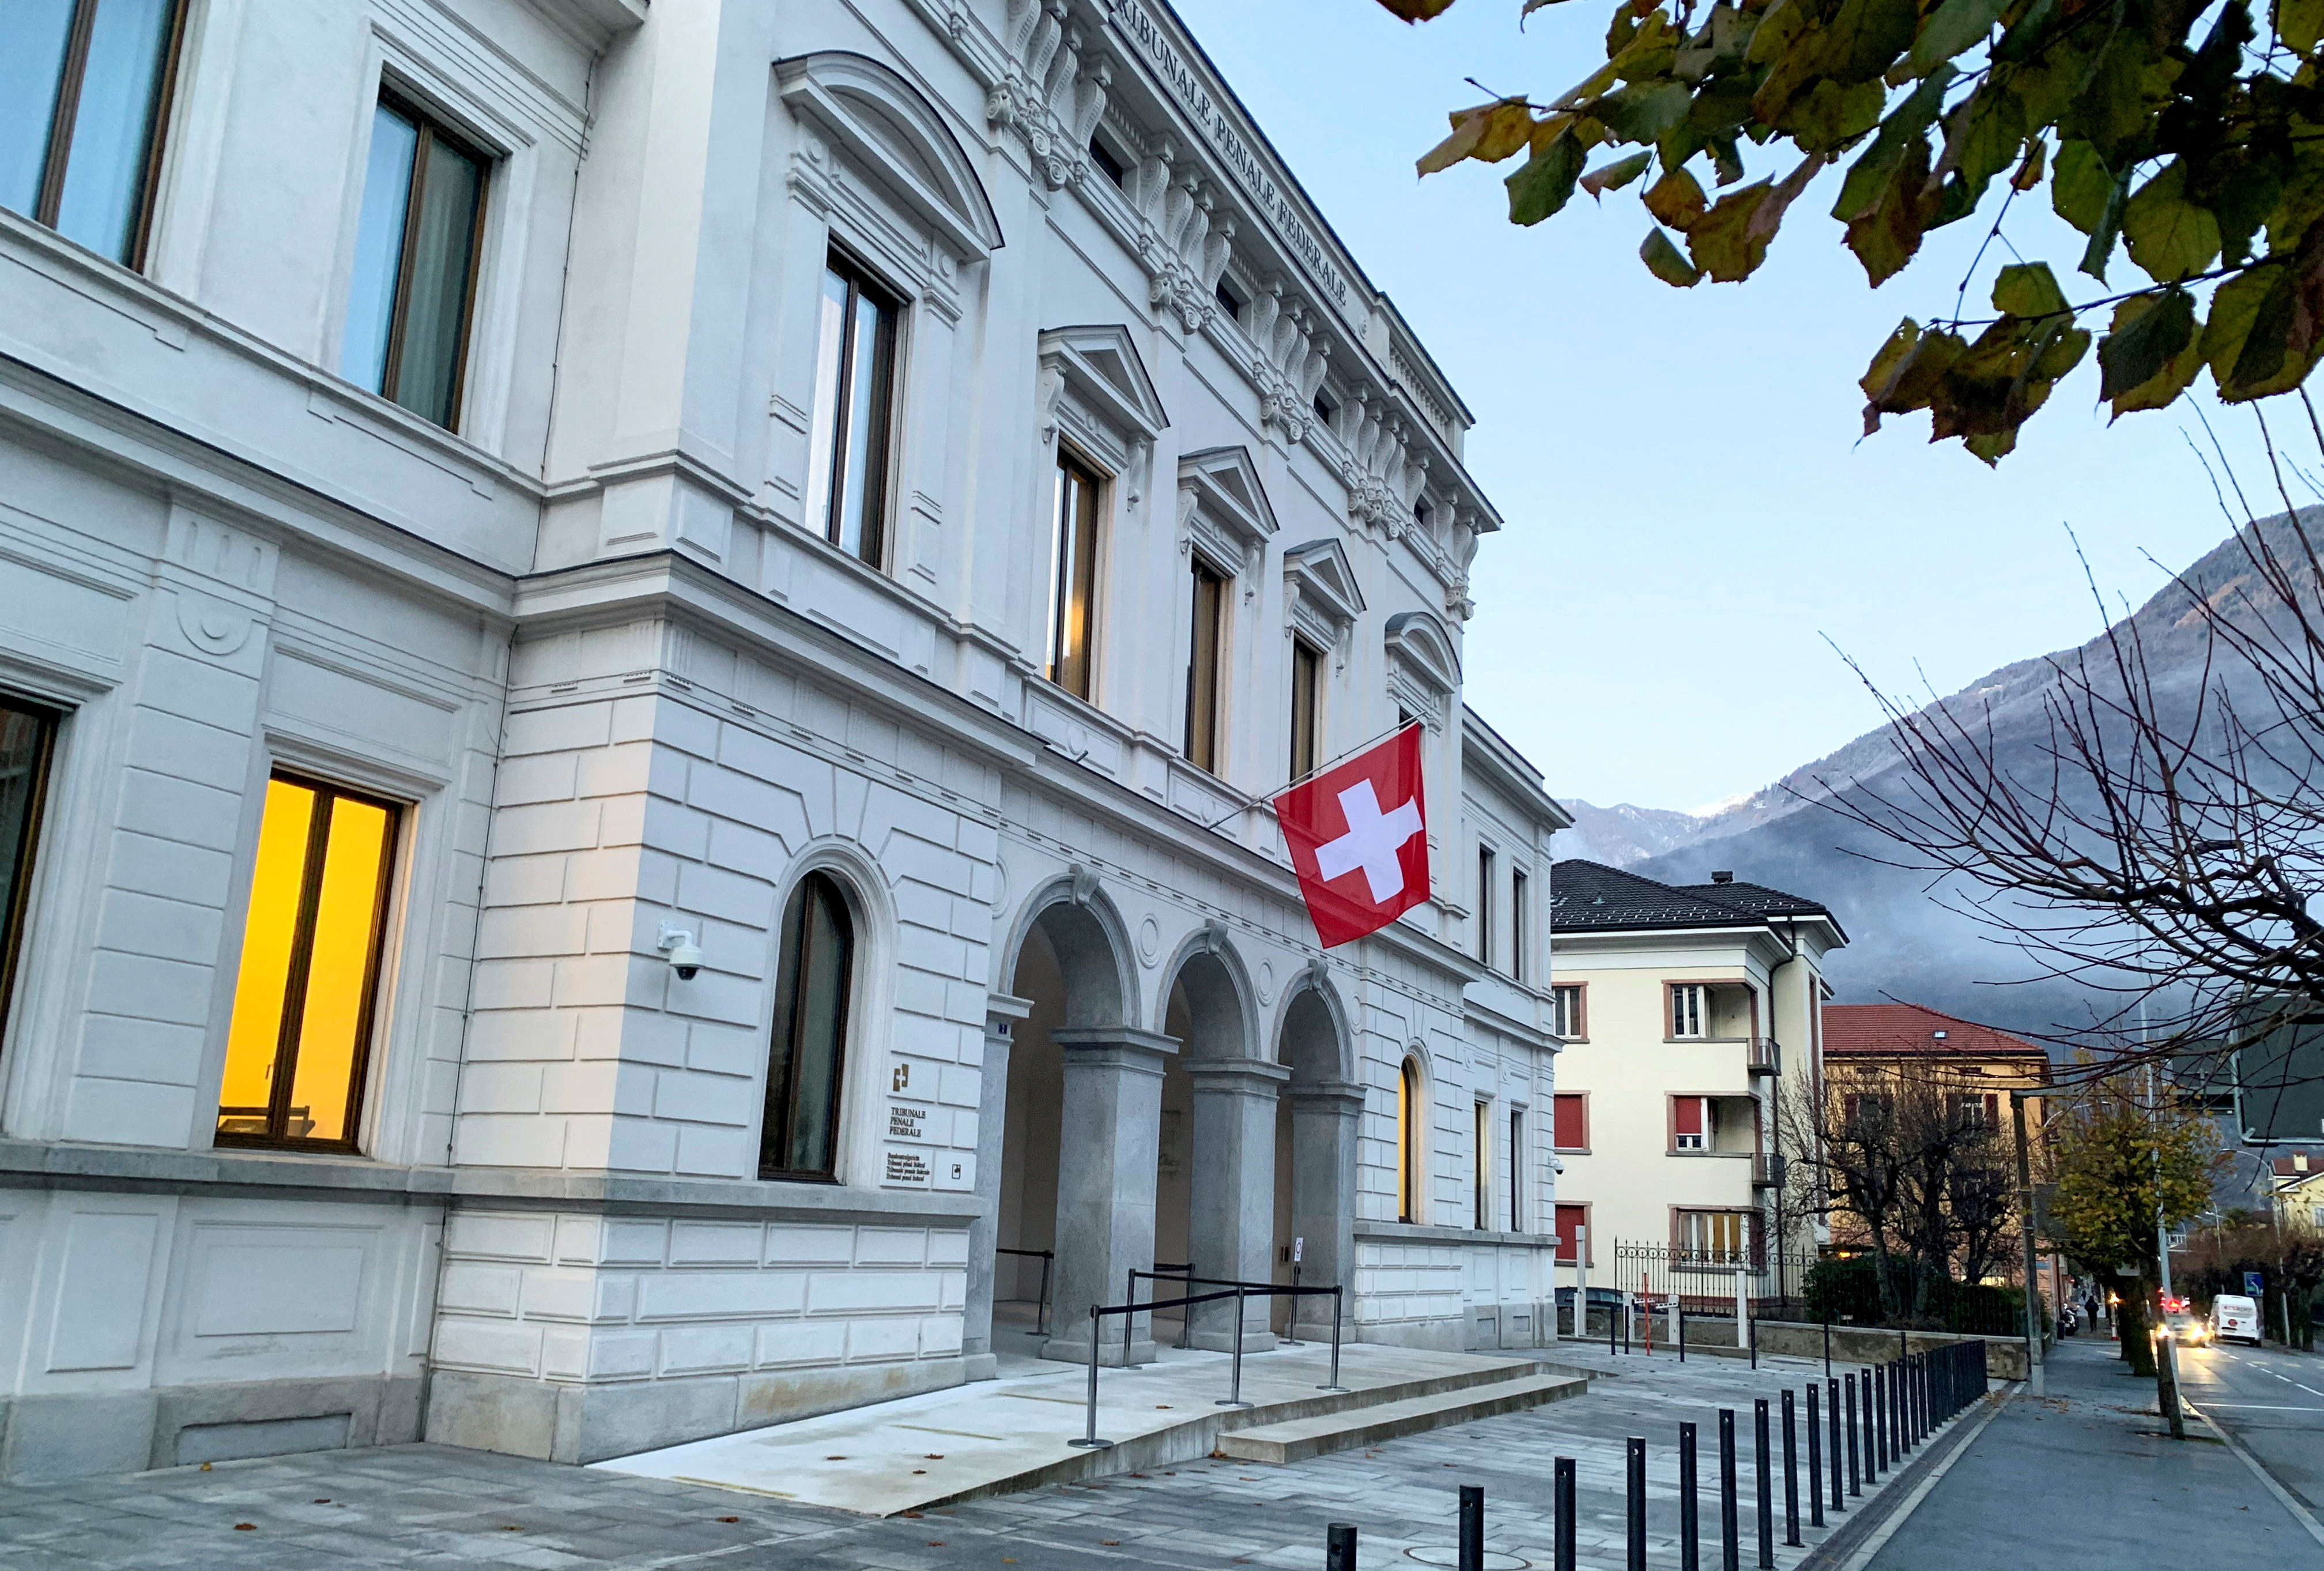 Switzerland's national flag is displayed on the Swiss Federal Criminal Court building in Bellinzona